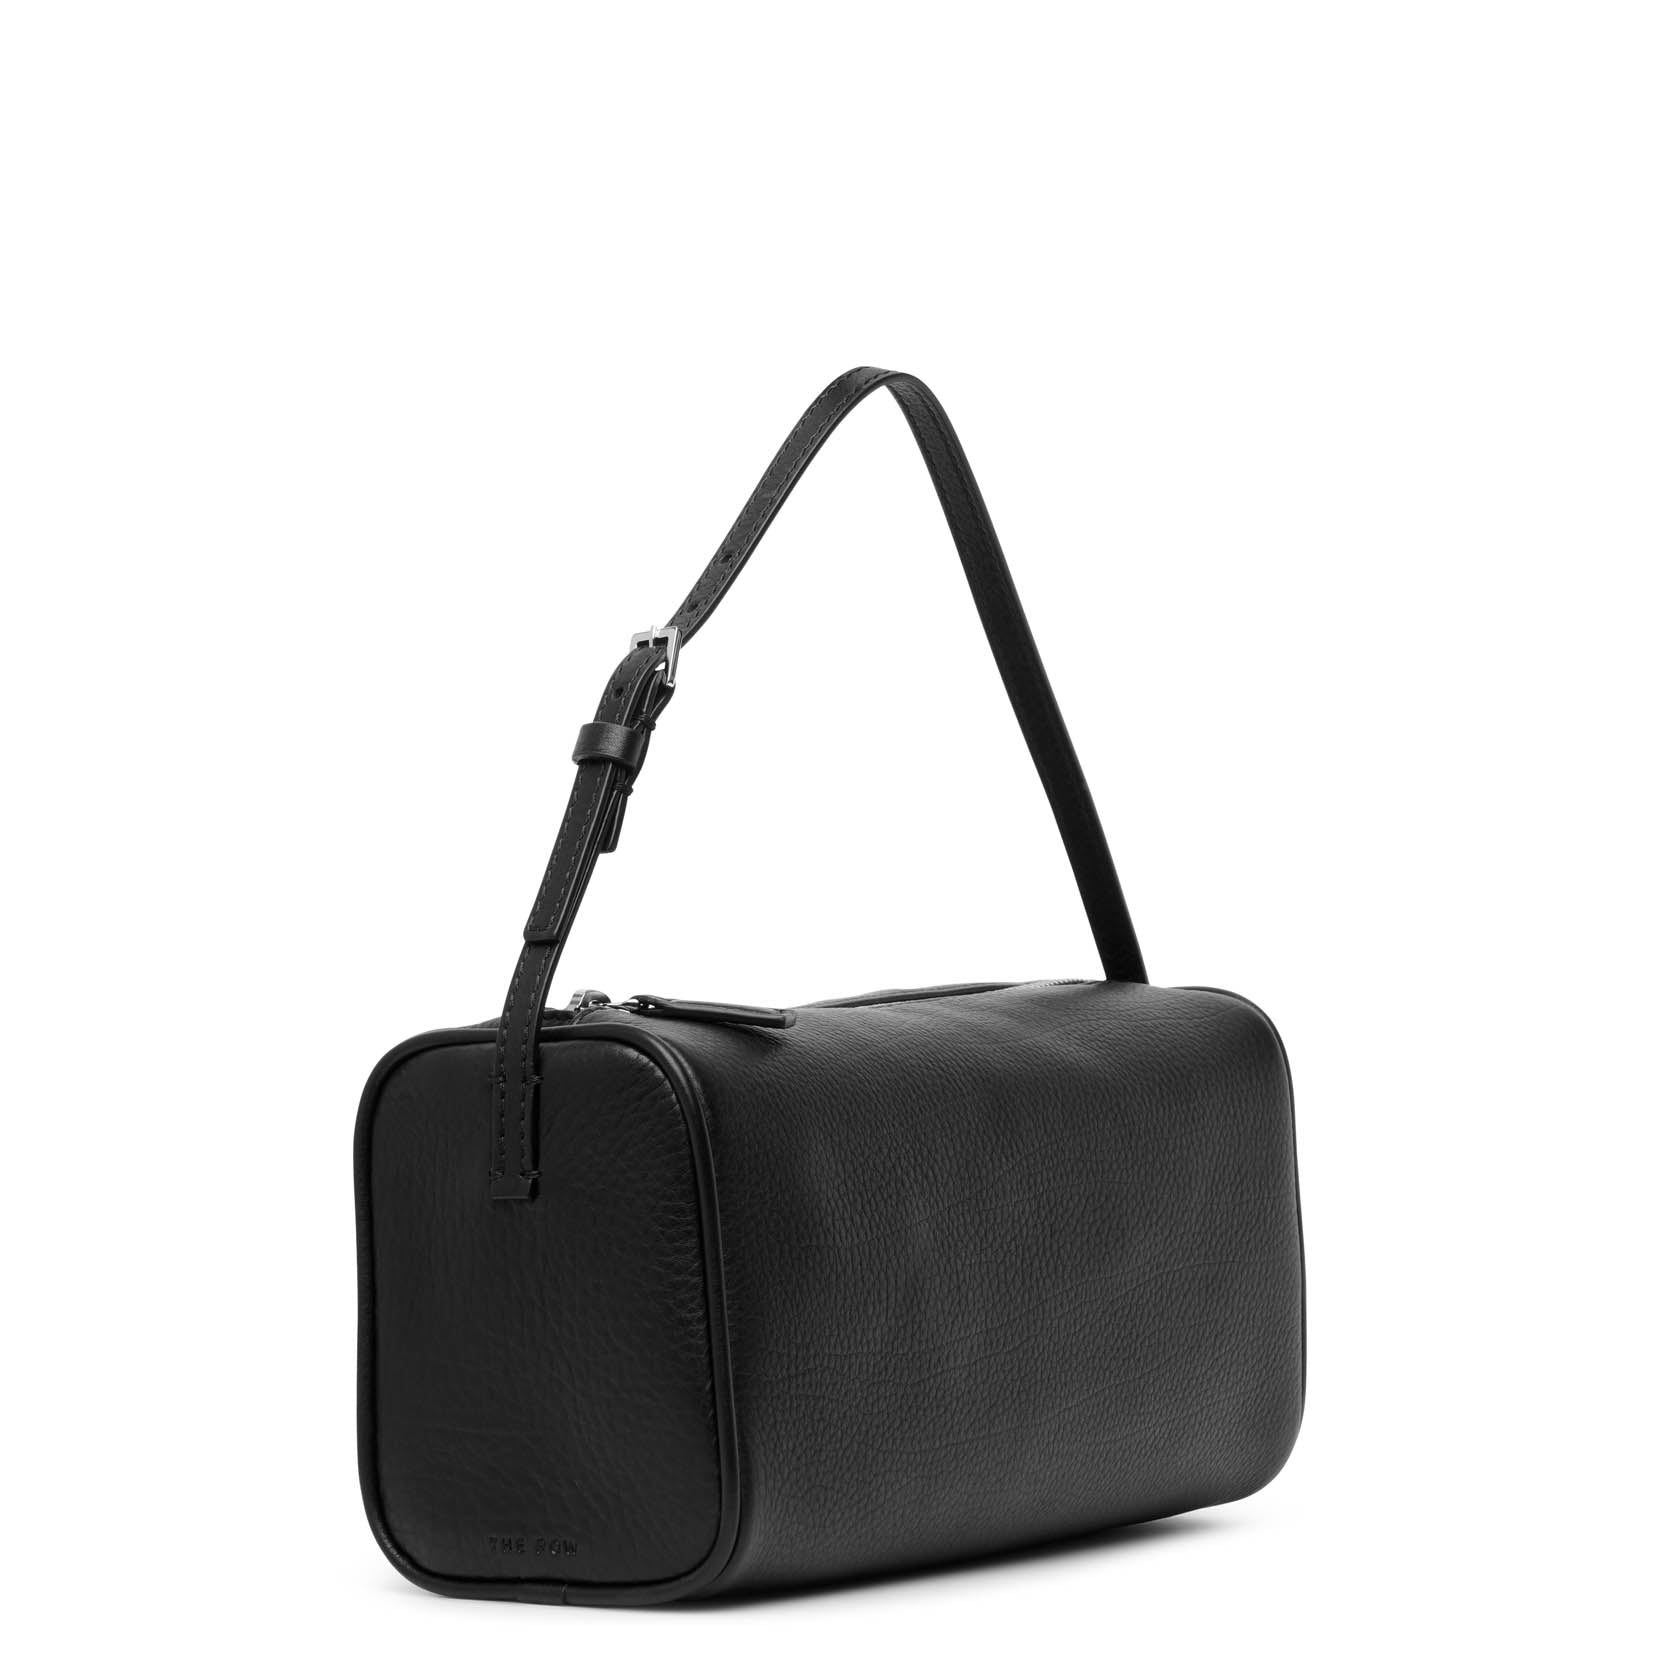 The Row, 90's black leather bag